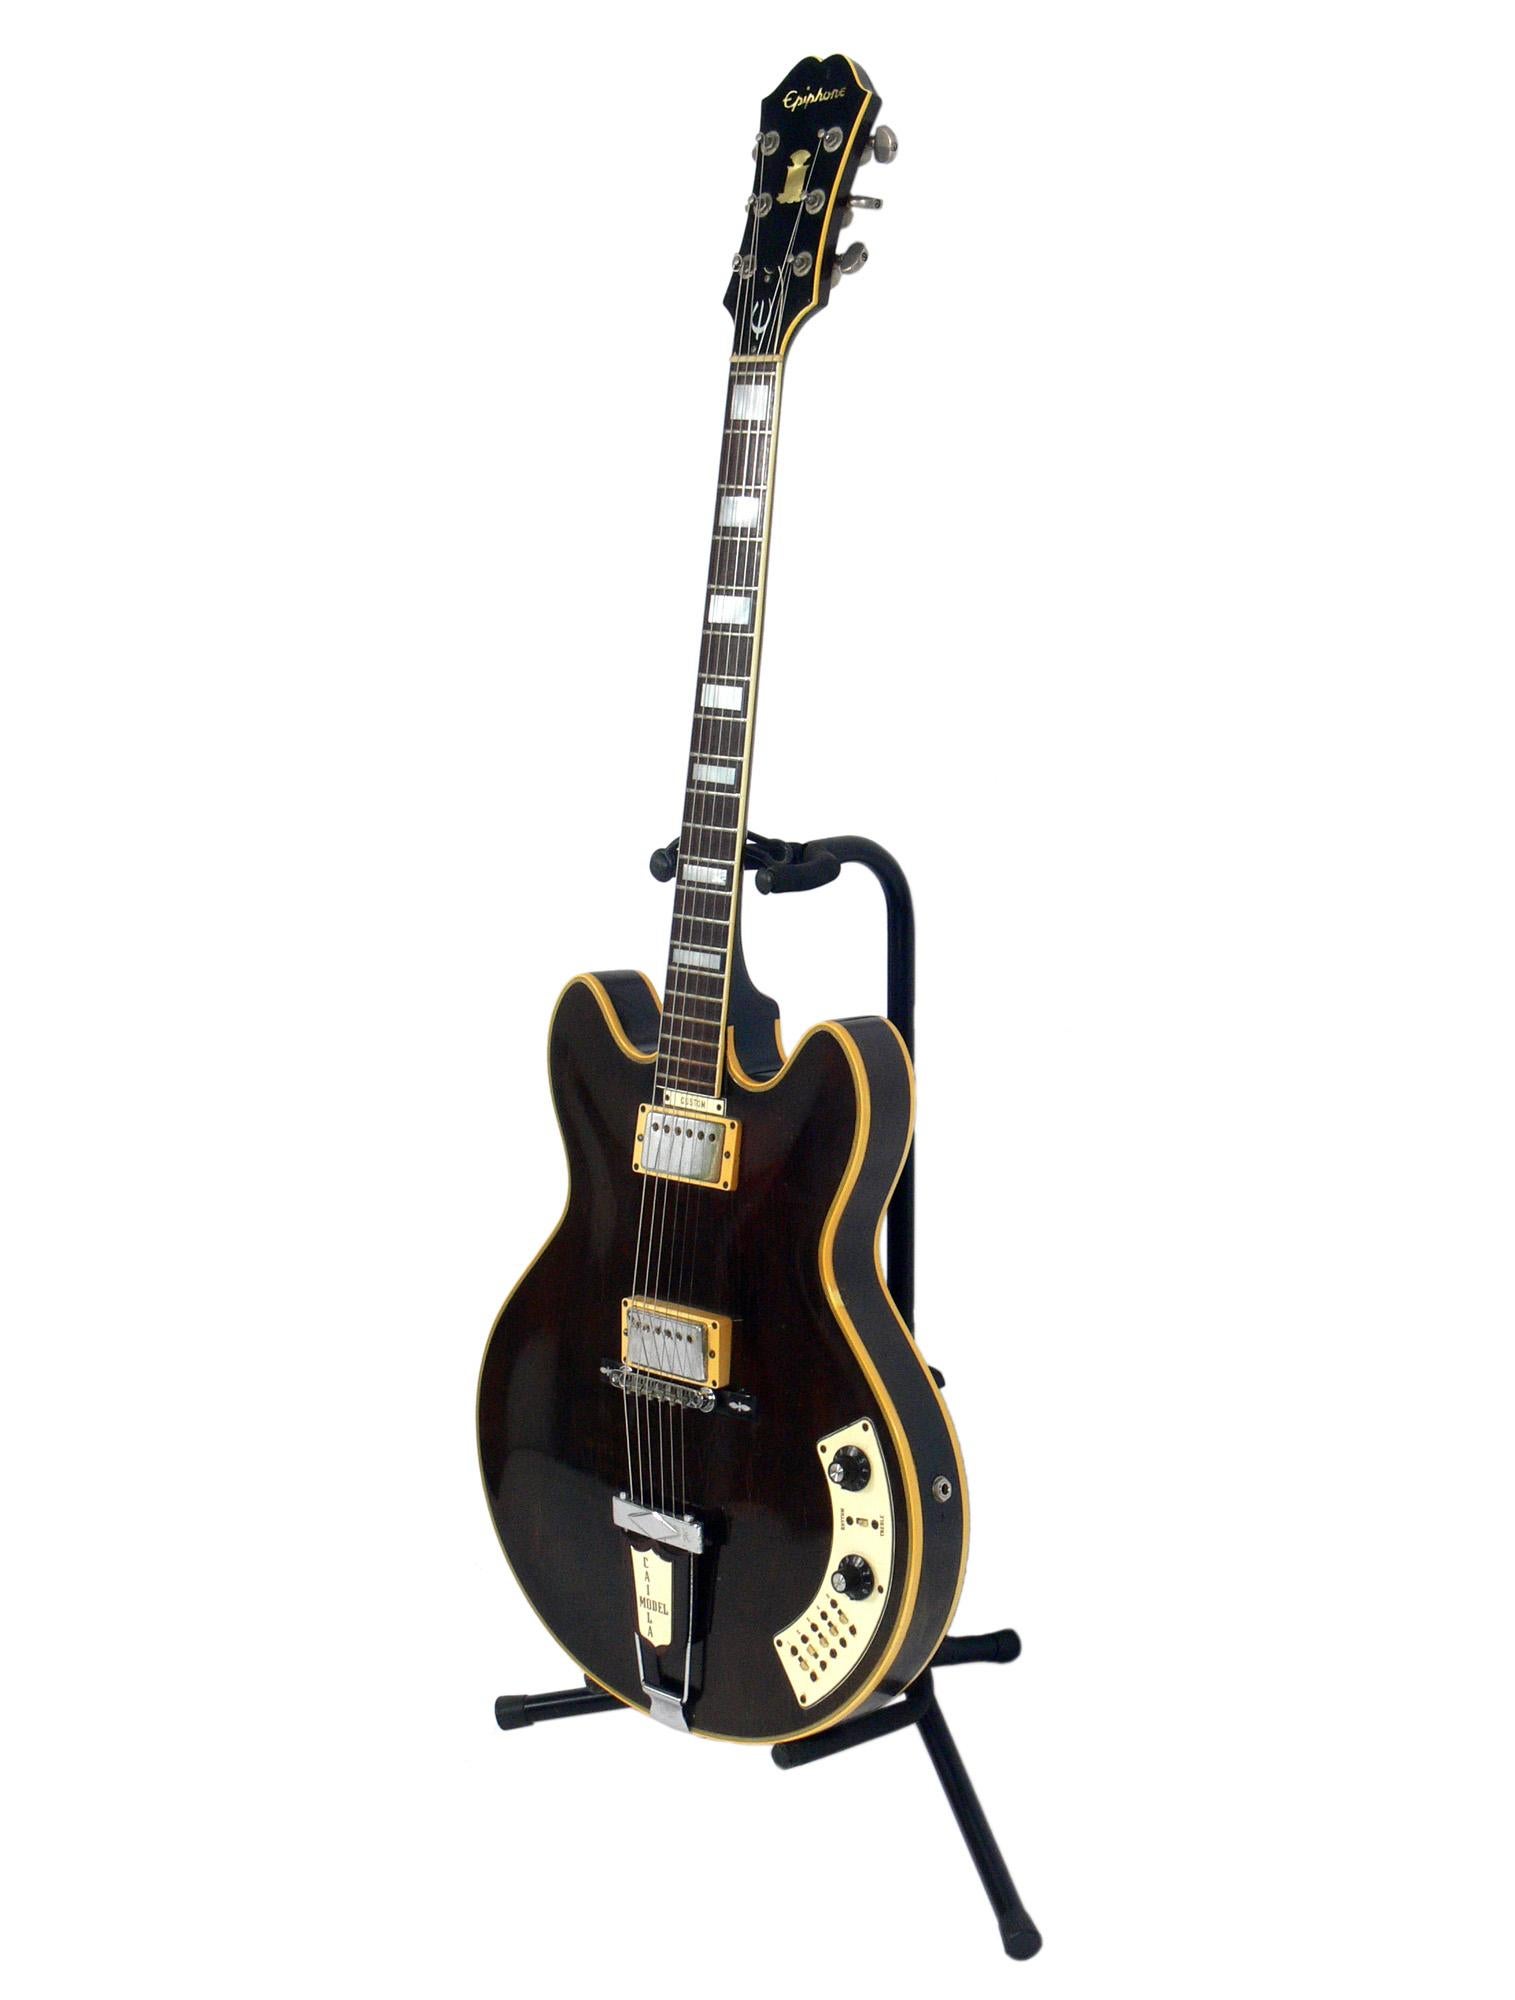 All original Epiphone Al Caiola custom guitar, circa late 1960s. This model was only made for six years, from 1963-1969, and then went out of production due to the high production costs associated with the fine materials and components used on it.